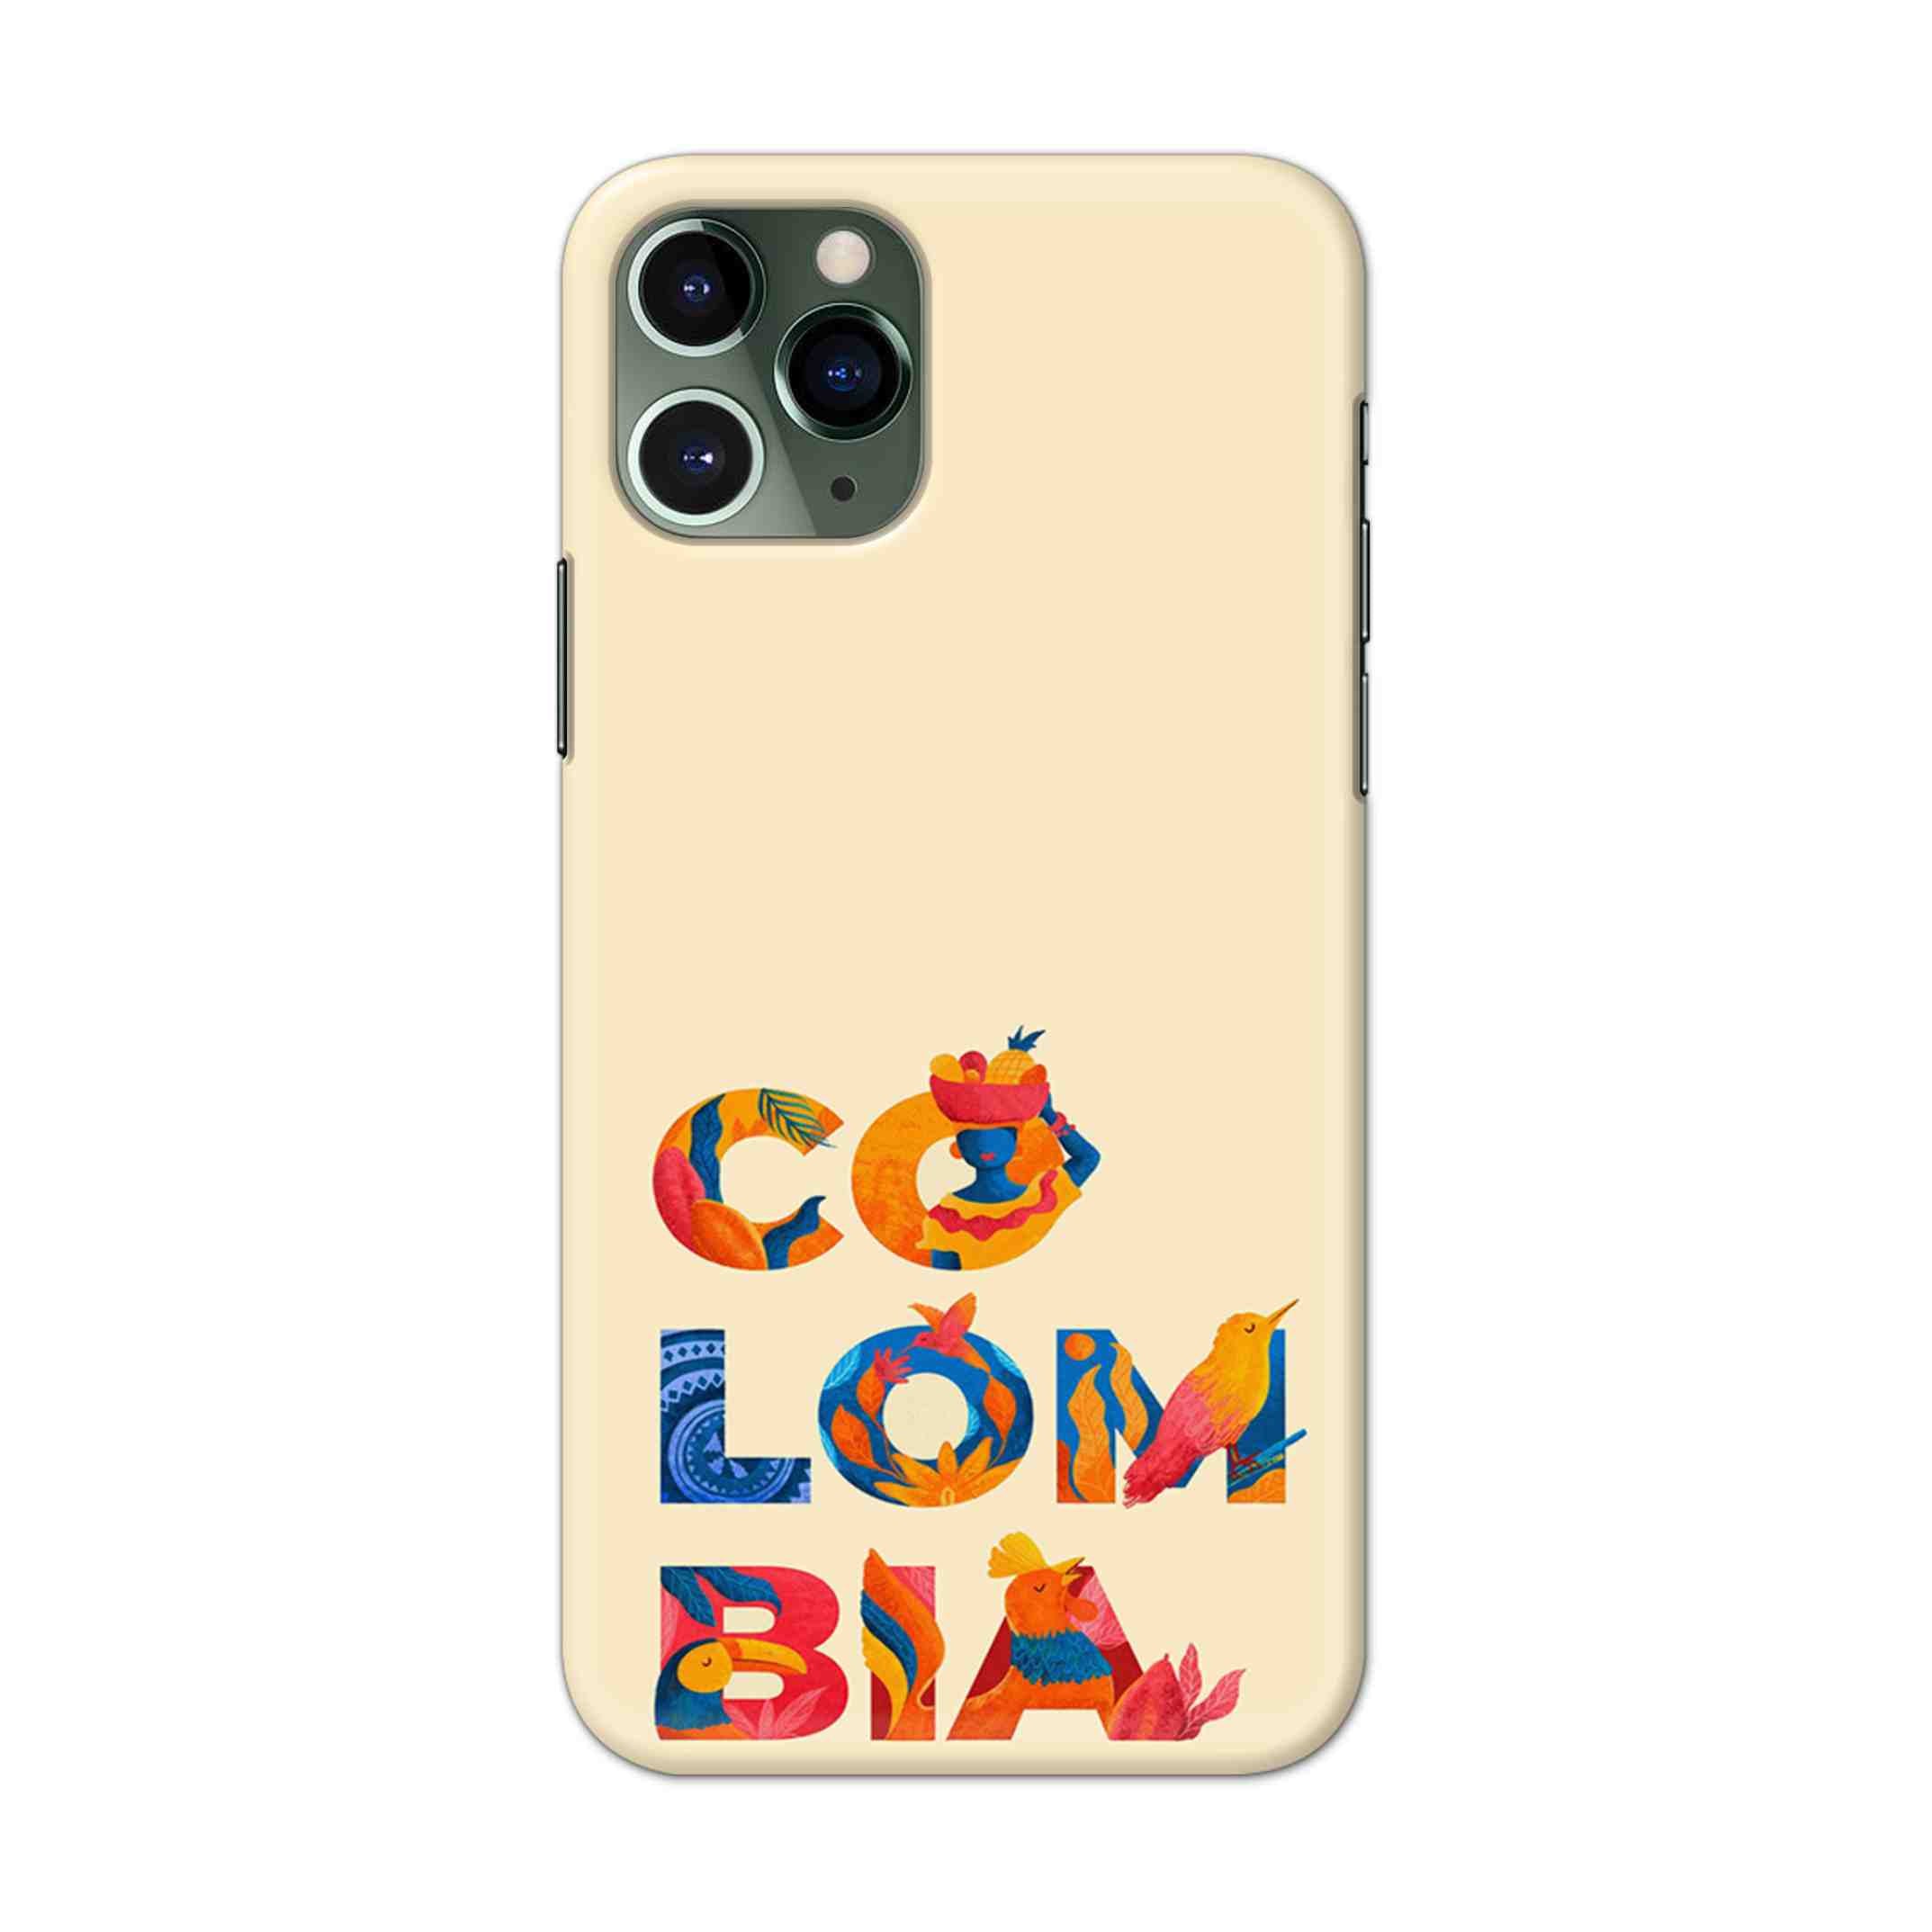 Buy Colombia Hard Back Mobile Phone Case/Cover For iPhone 11 Pro Online